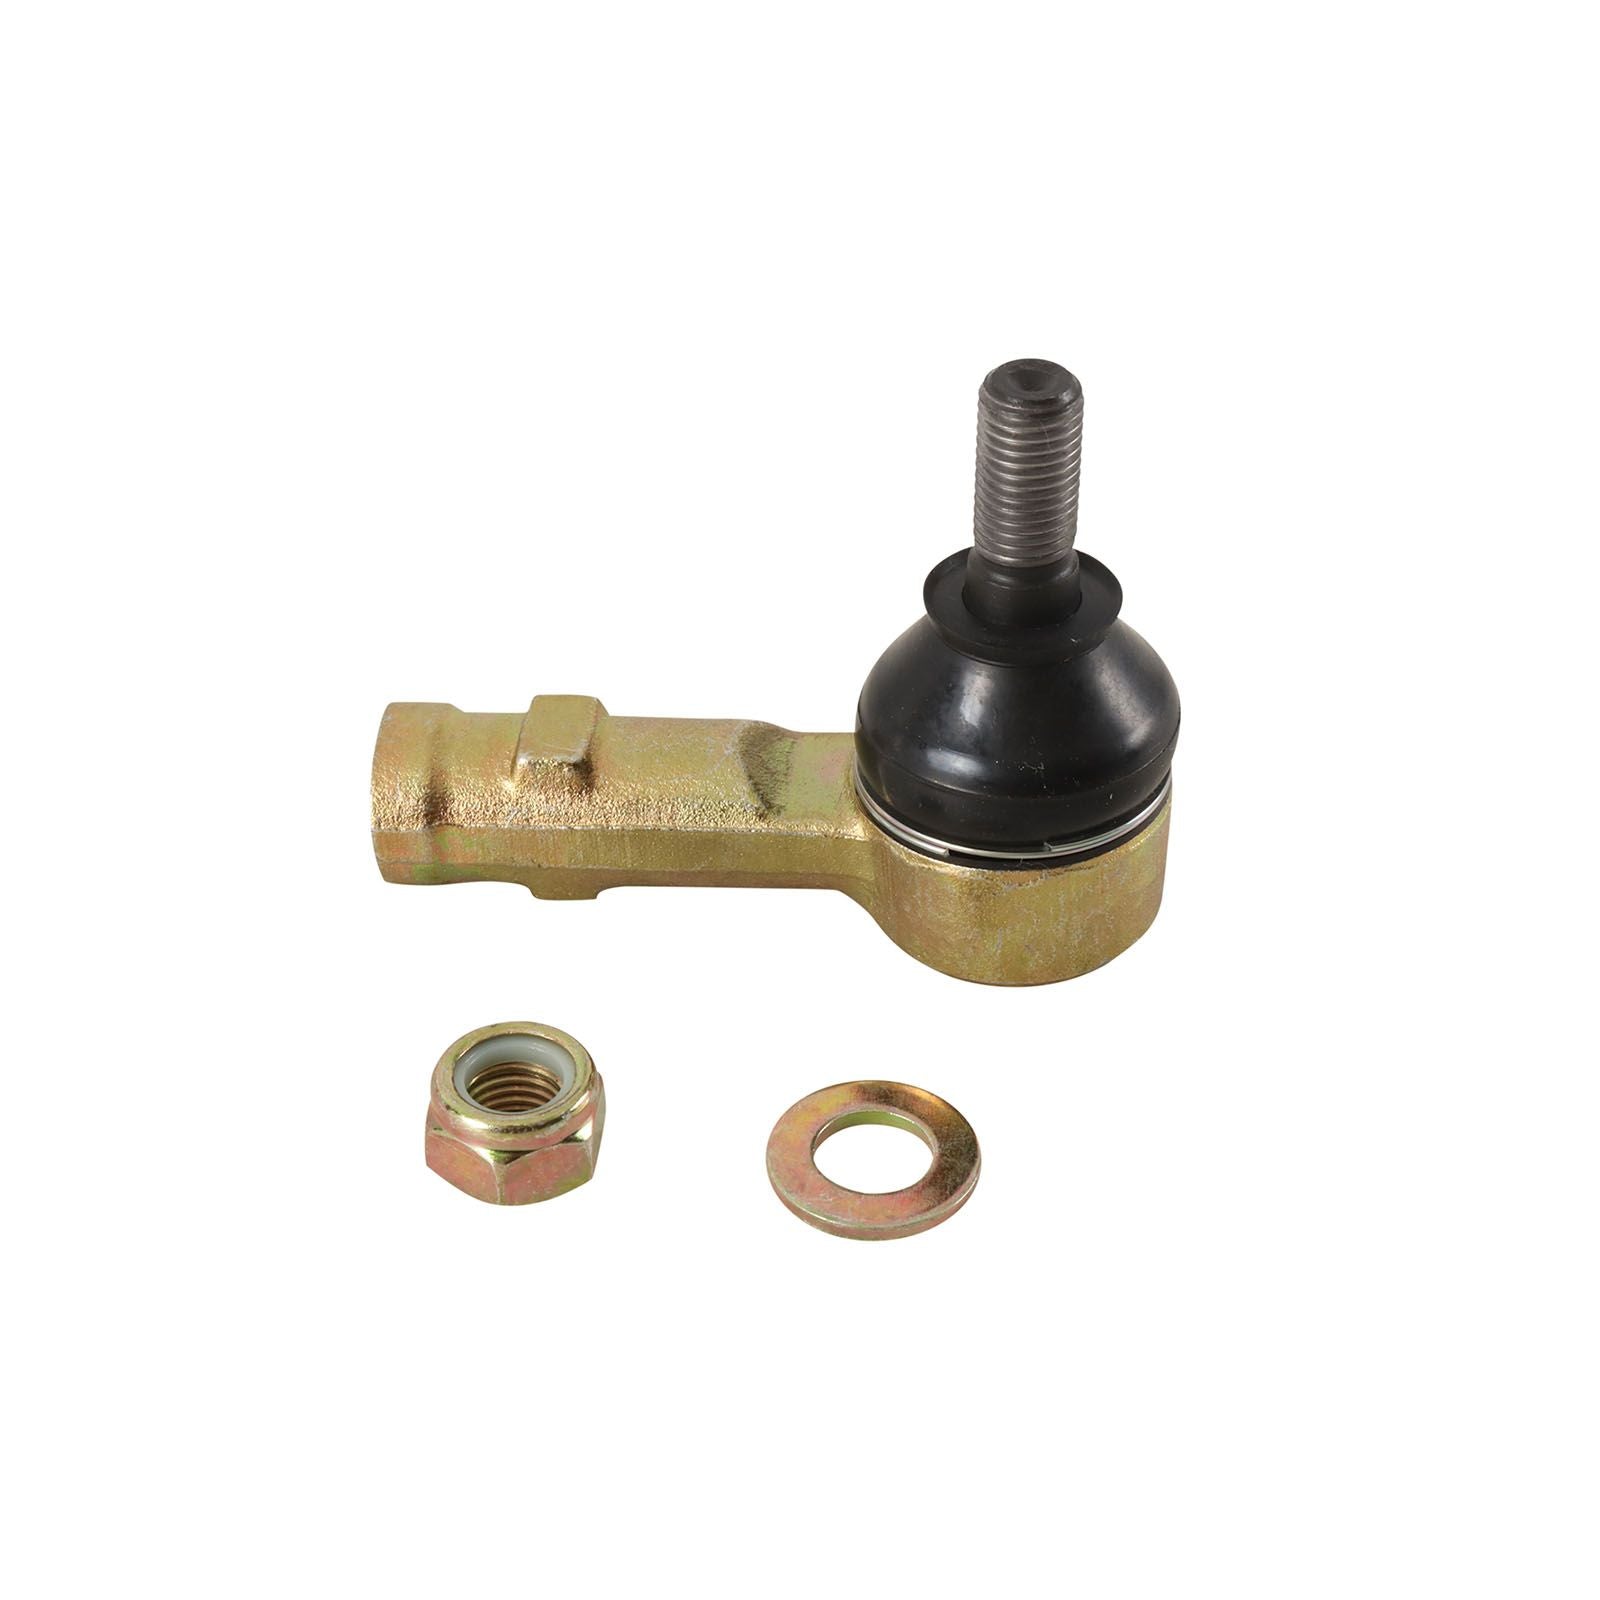 New ALL BALLS TIE ROD END KIT 51-1063 AB511063